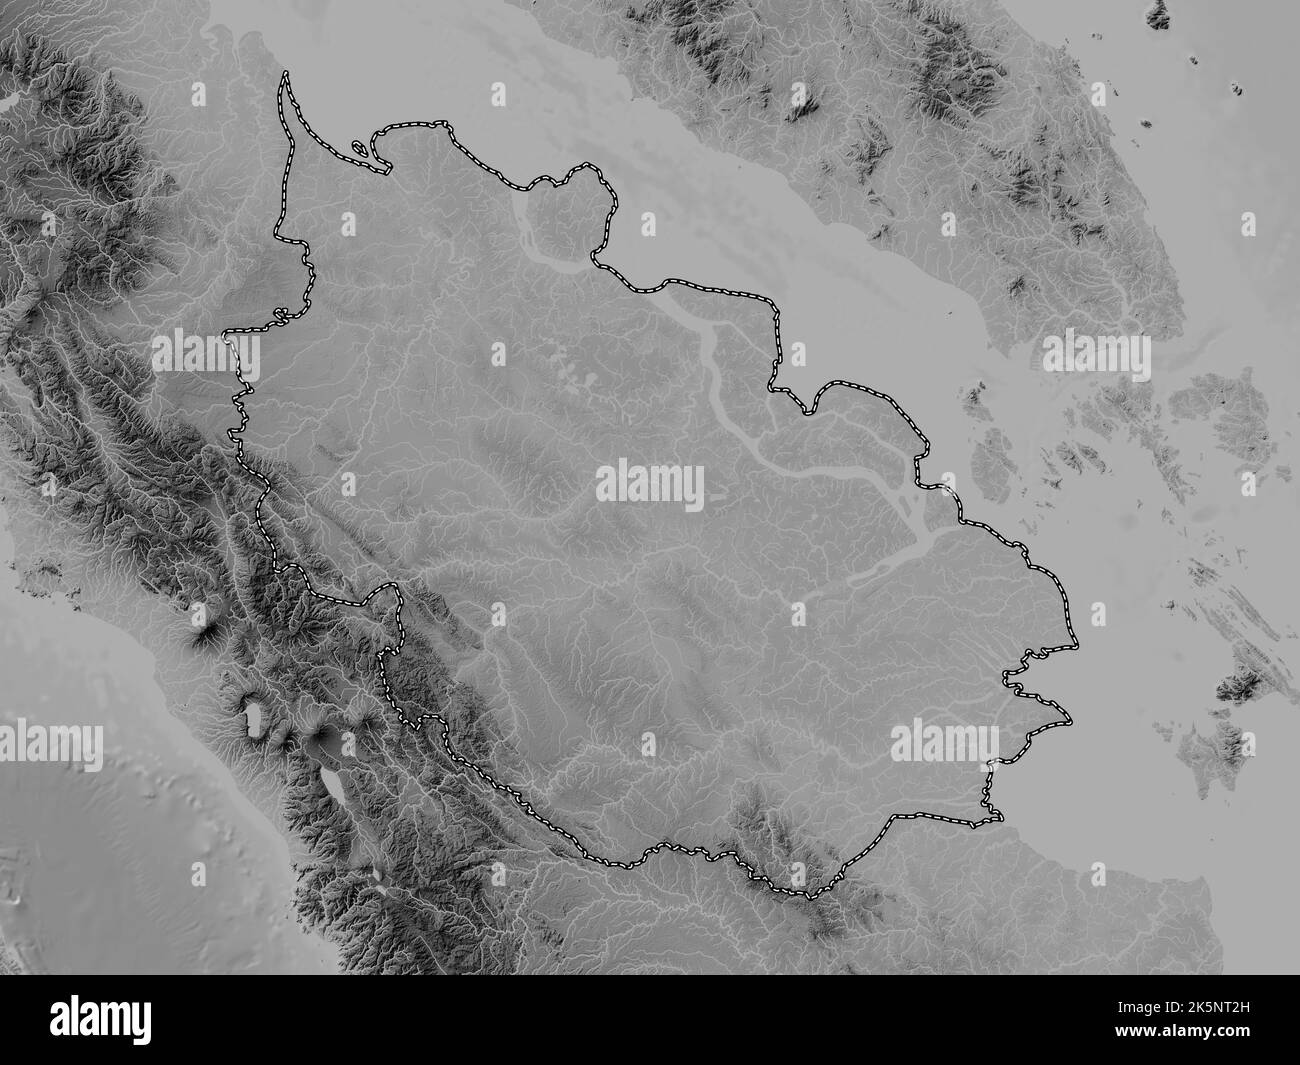 Riau, province of Indonesia. Grayscale elevation map with lakes and rivers Stock Photo